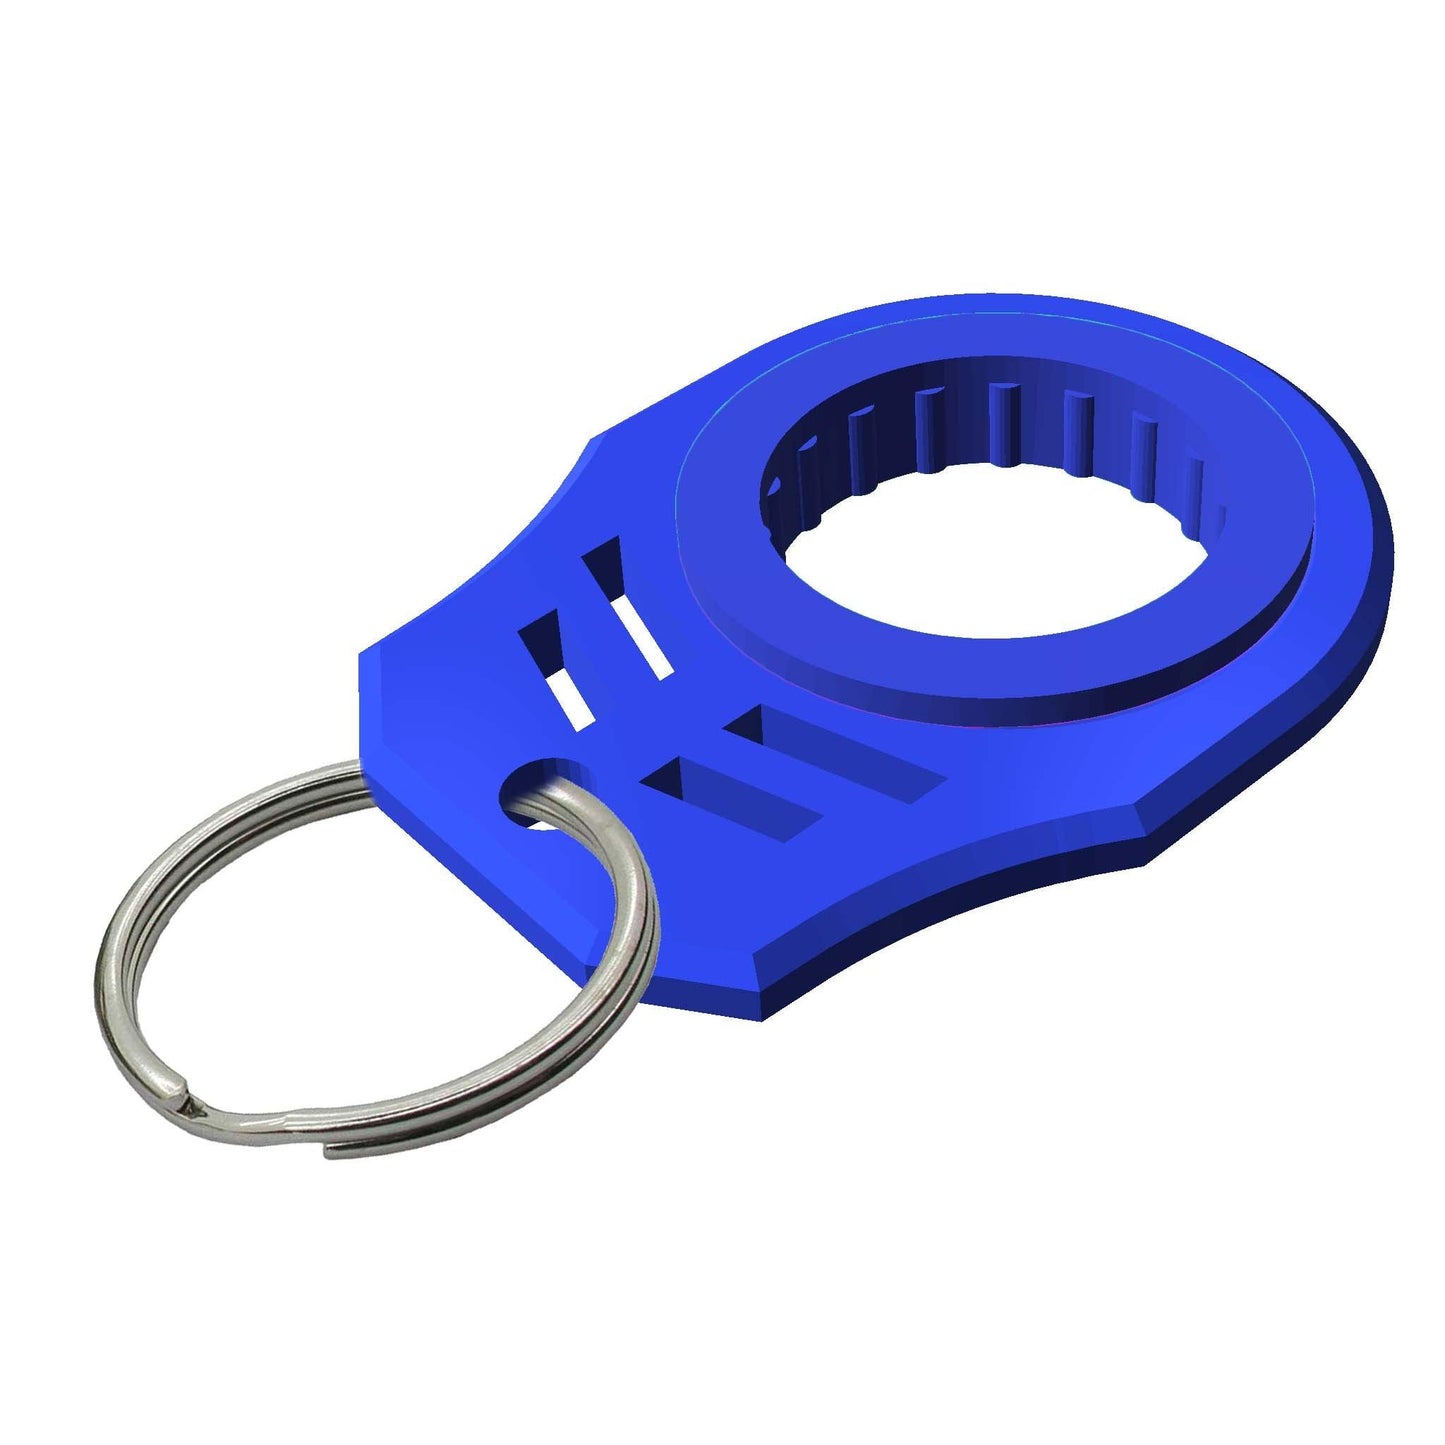 Unique Key Spinner with Chain Attachment